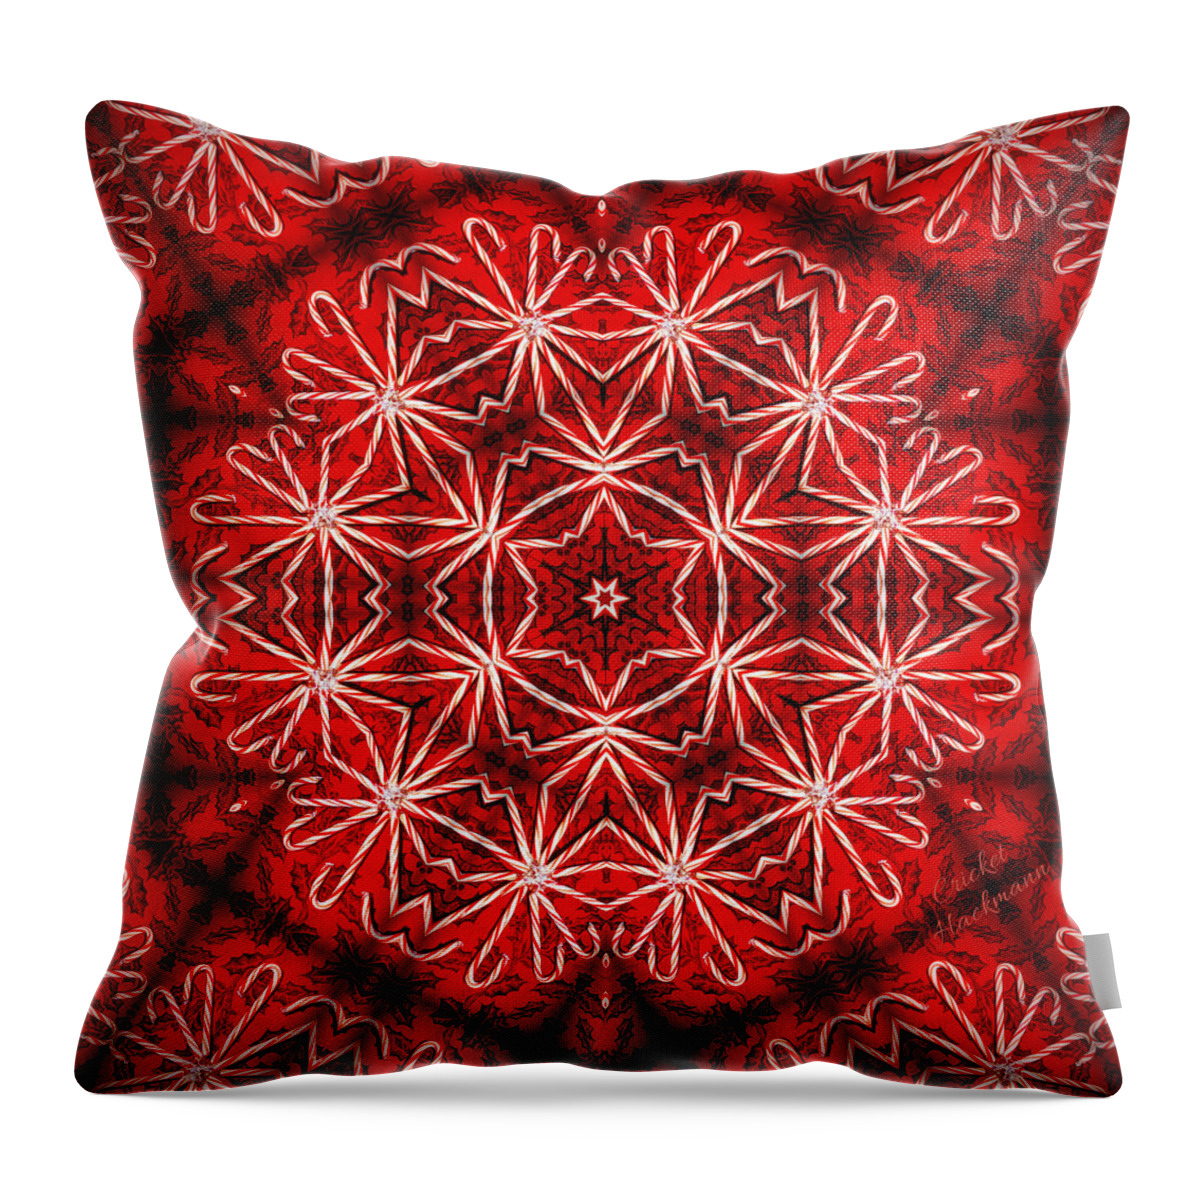 Peppermint Throw Pillow featuring the photograph Peppermint Snowflake by Cricket Hackmann